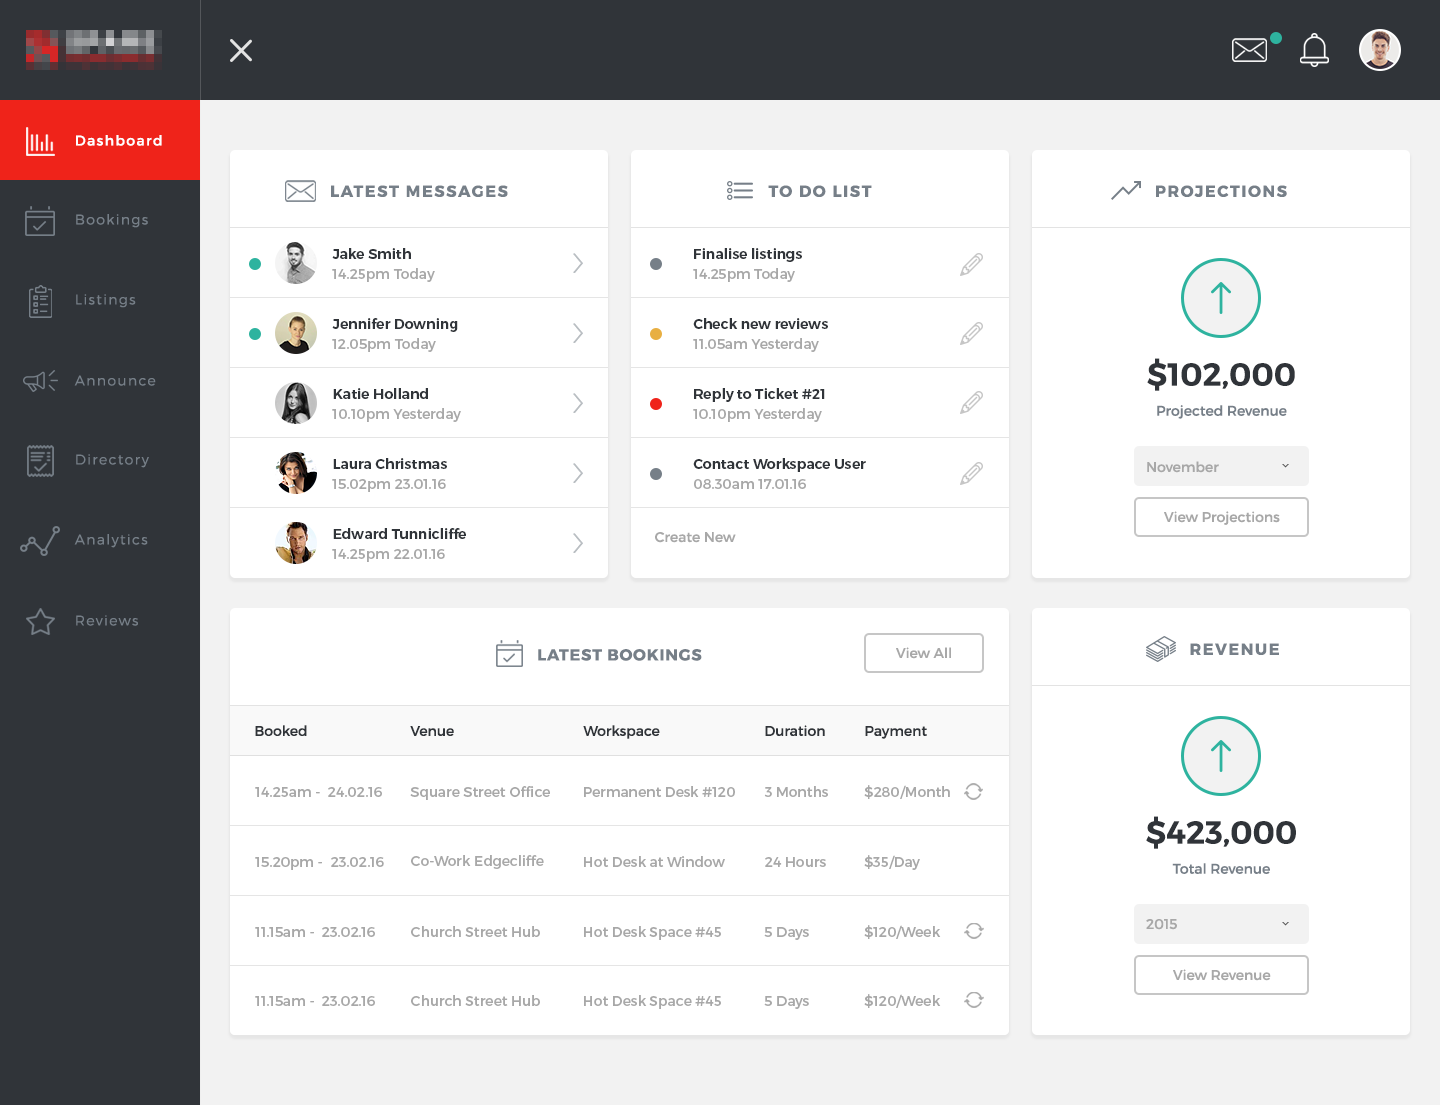 Dribbble - dashboard_01.png by James Roope.